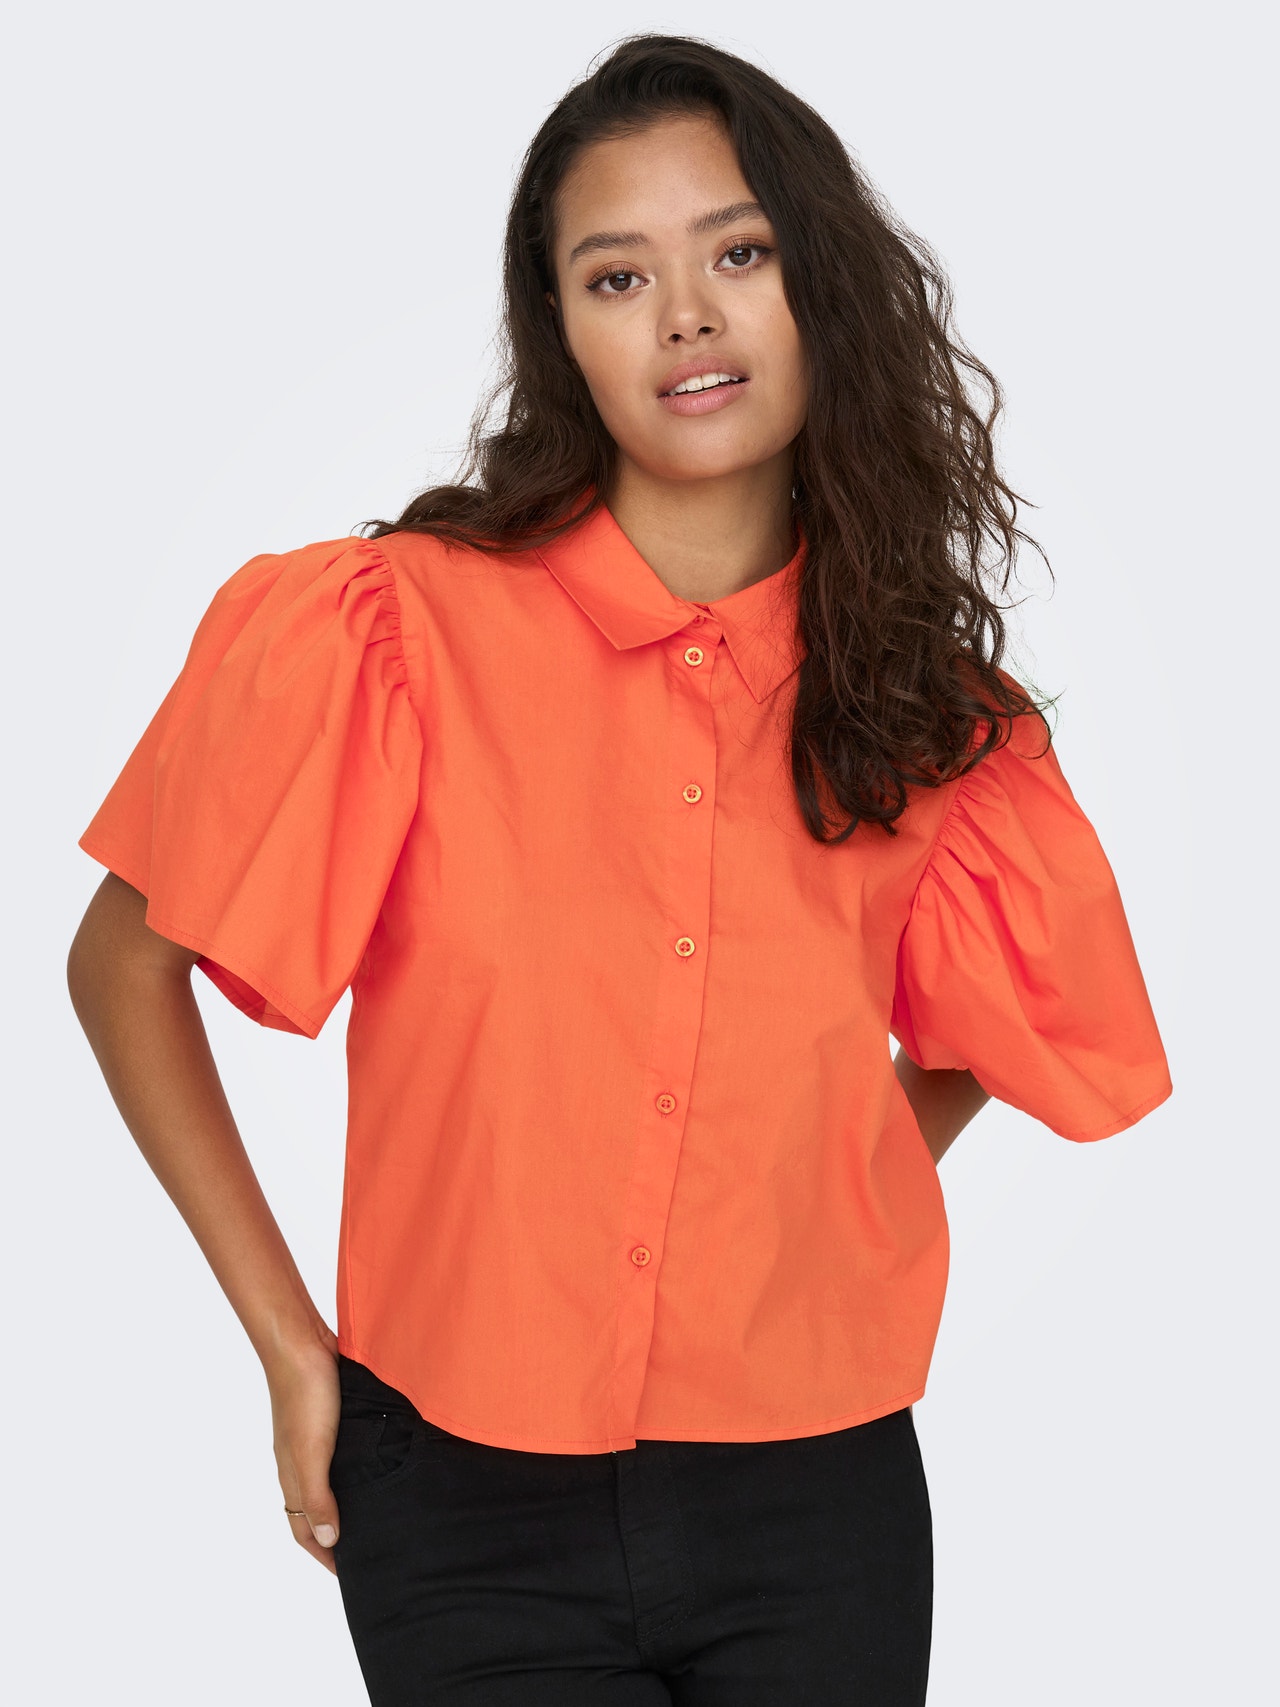 ONLY Shirt with Bell Sleeves -Scarlet Ibis - 15286420